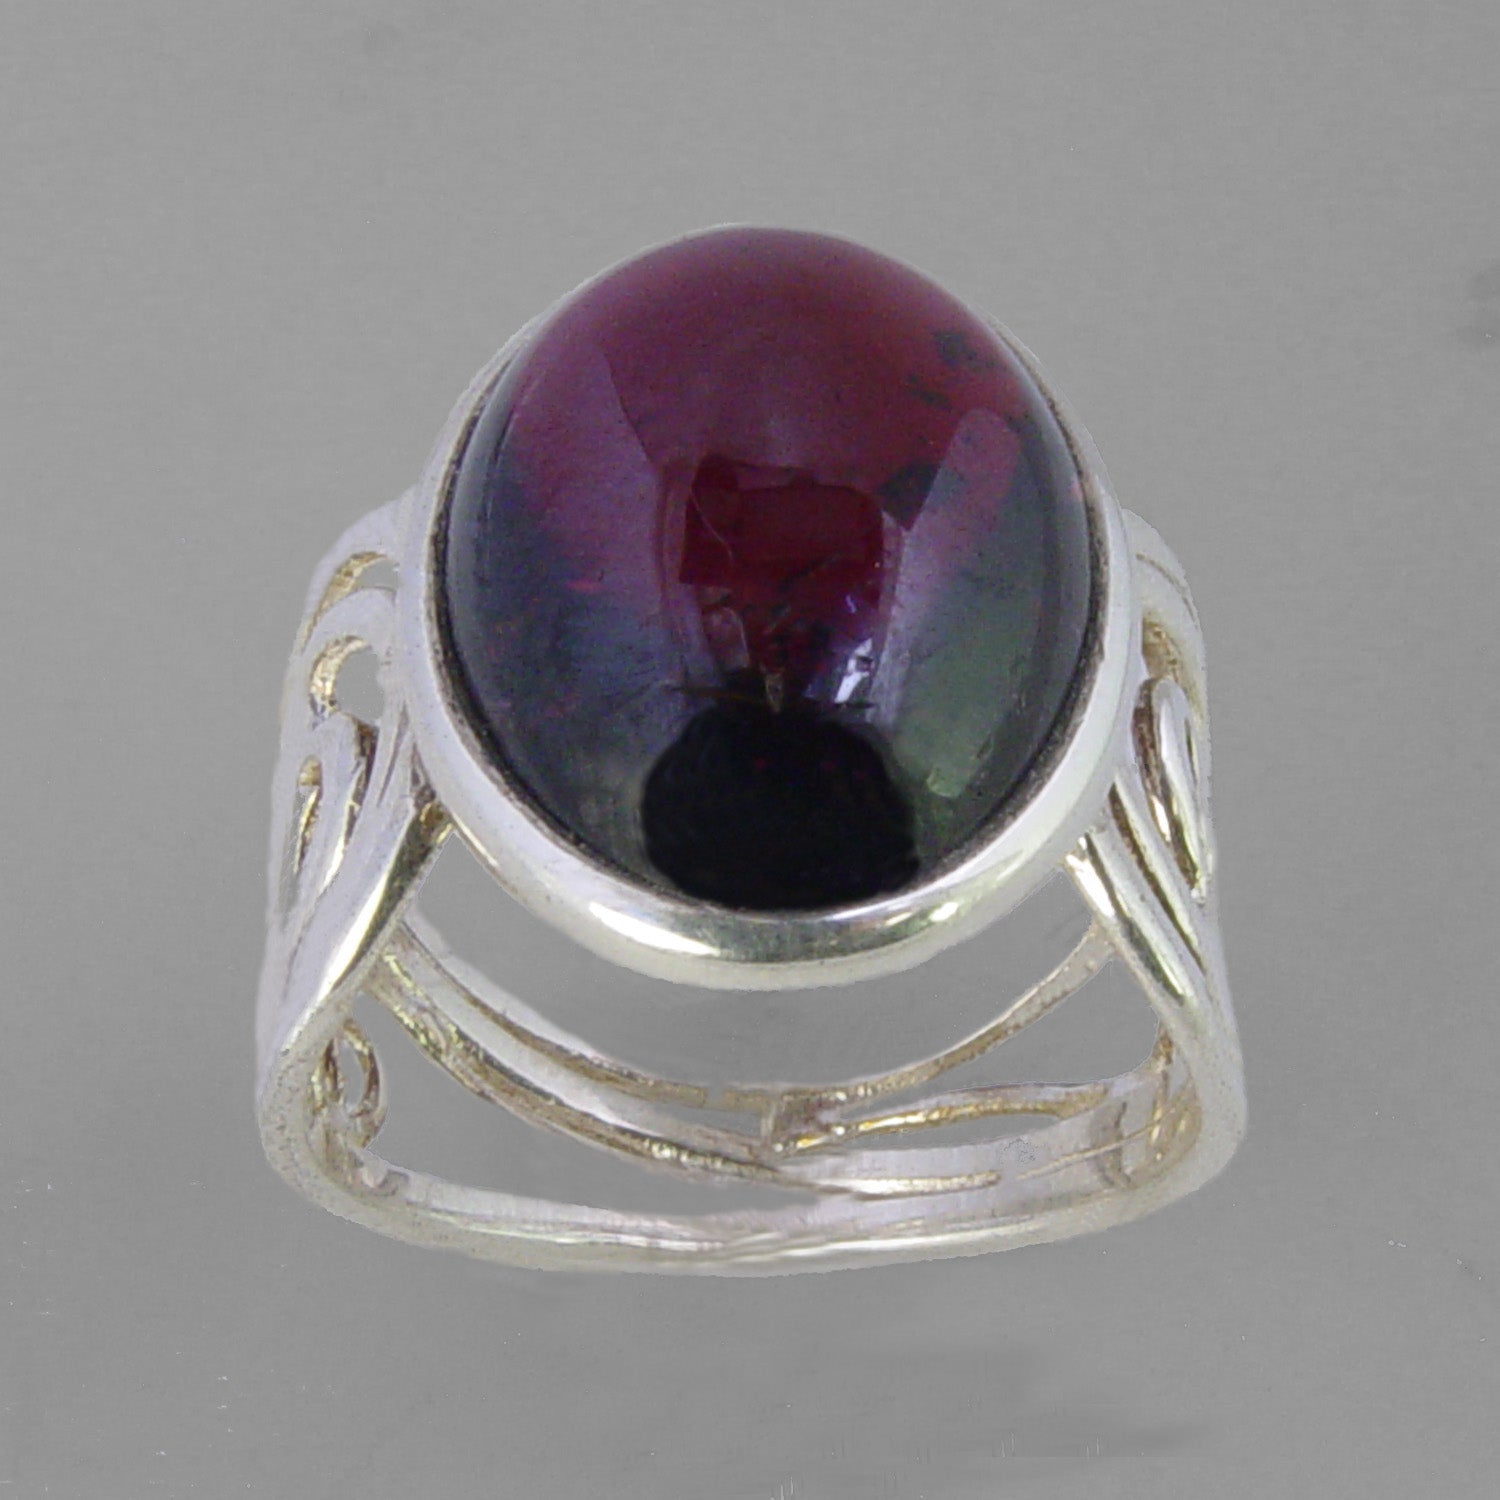 Garnet 11.4 ct Oval Cab Sterling Silver Ring, Size 8